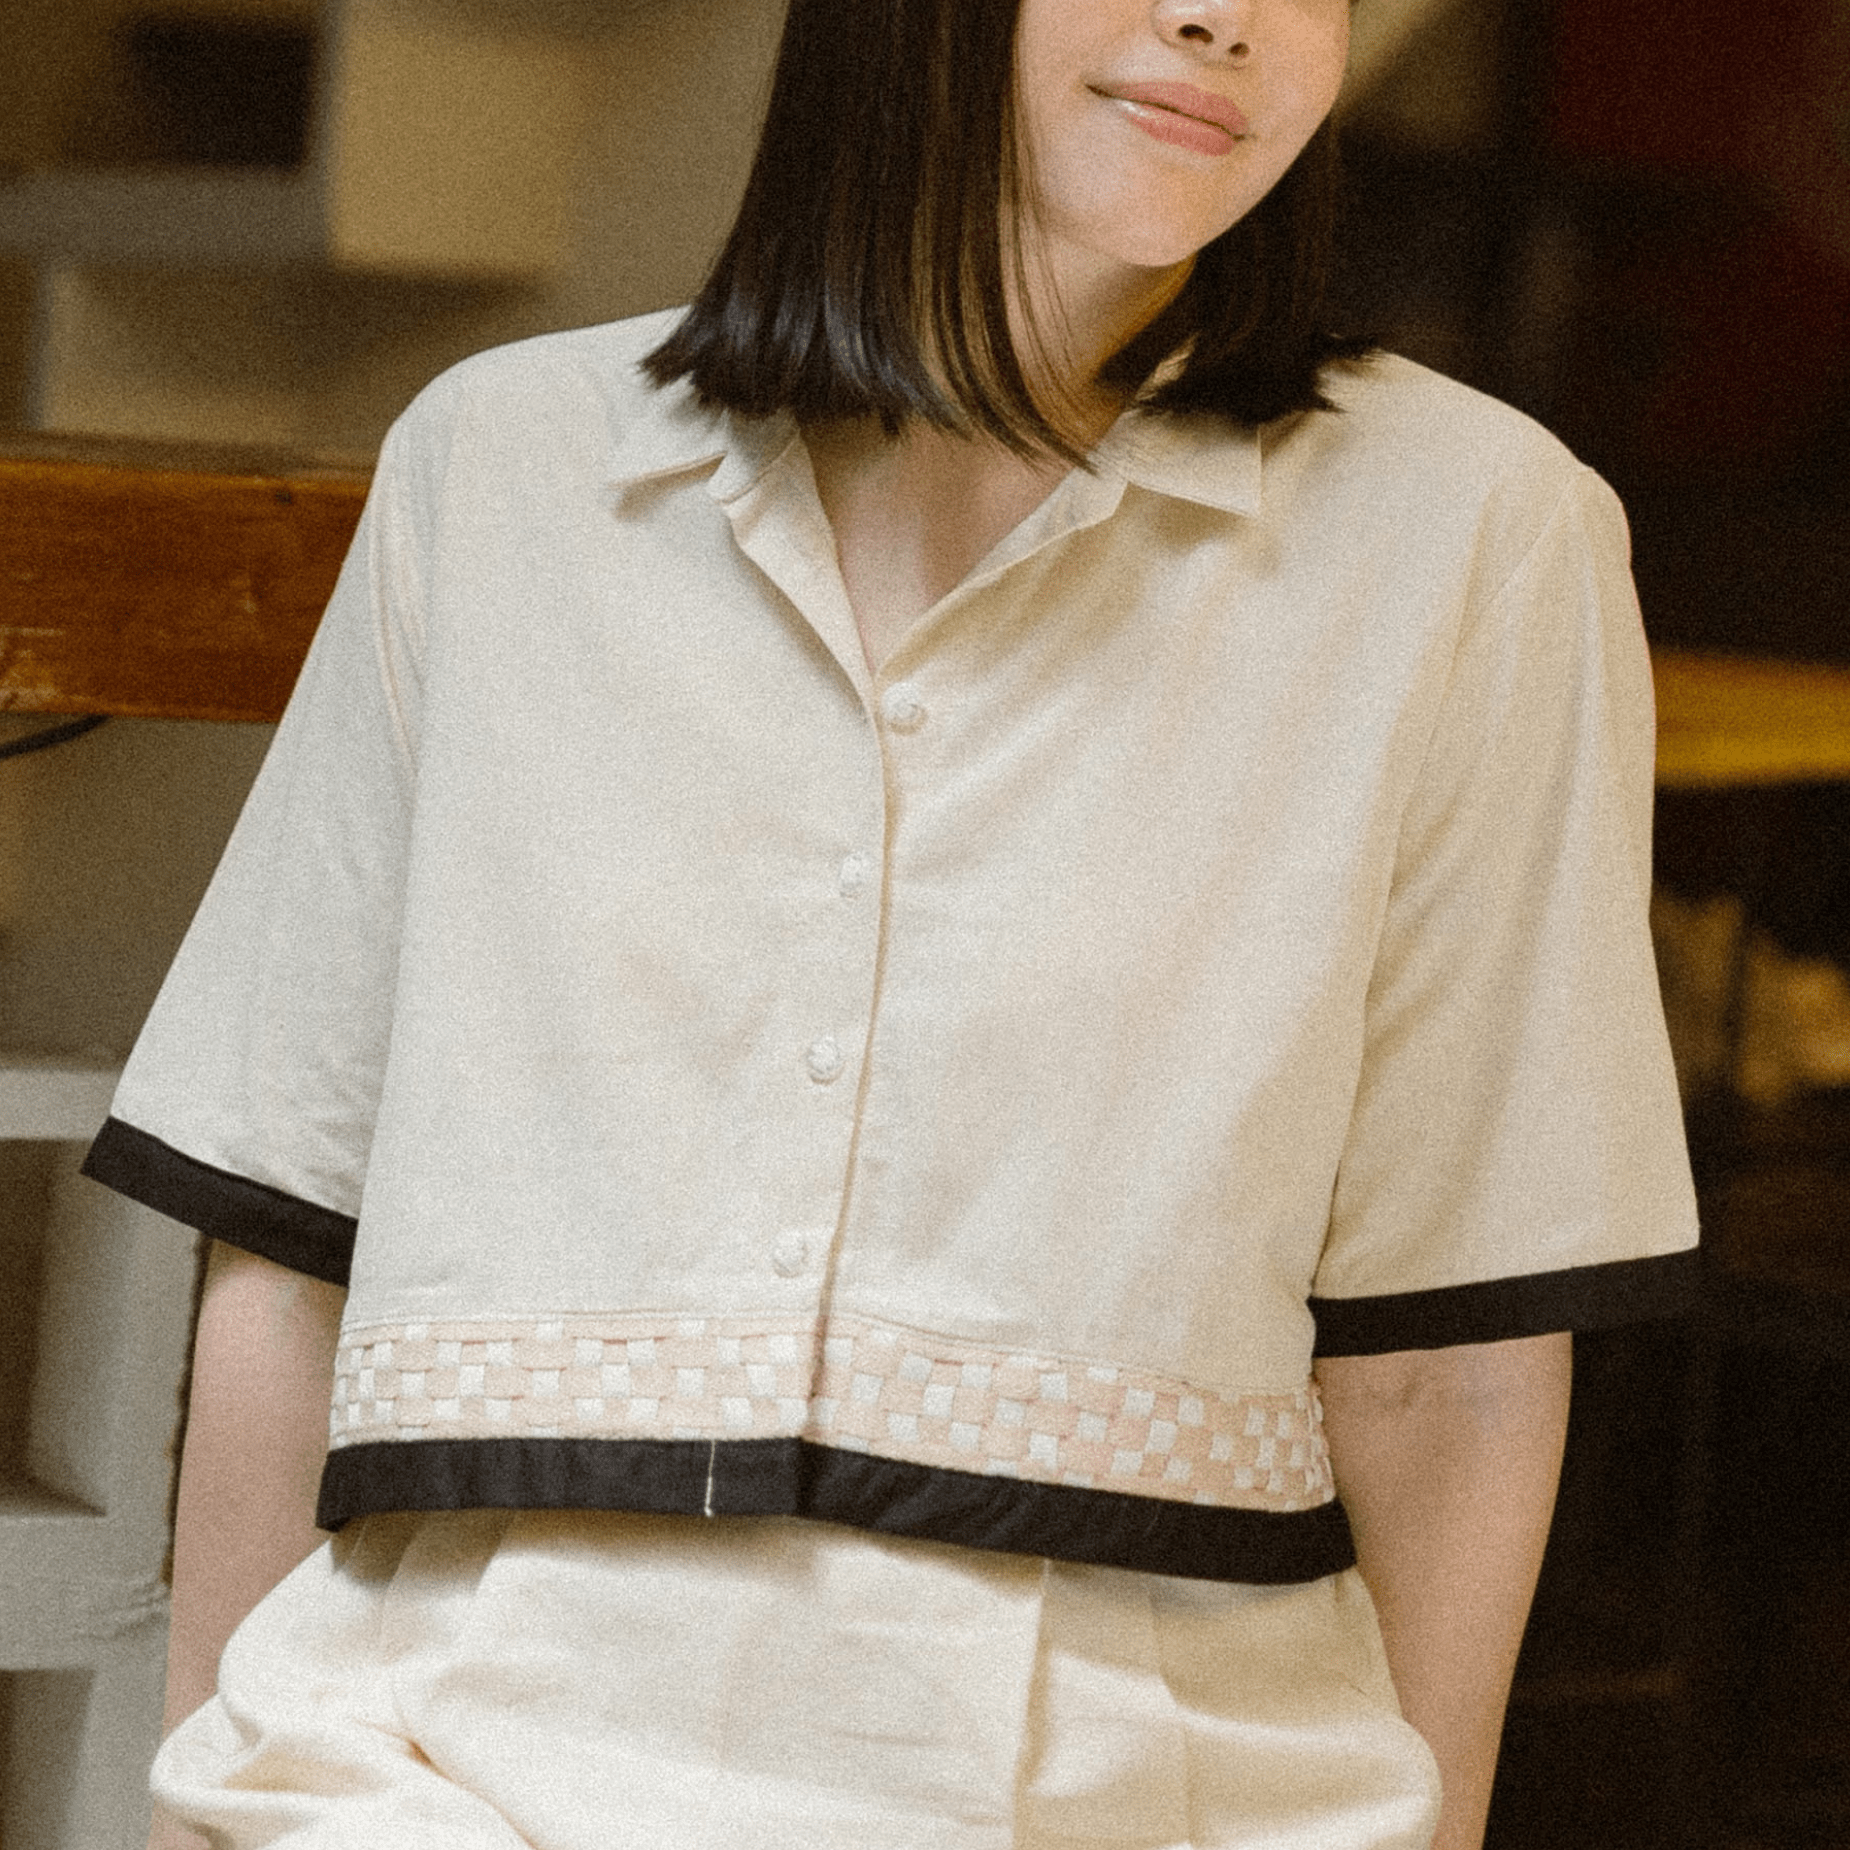 Dito at Doon Cropped Button-down Top Black & Beige Fashion Rags2Riches